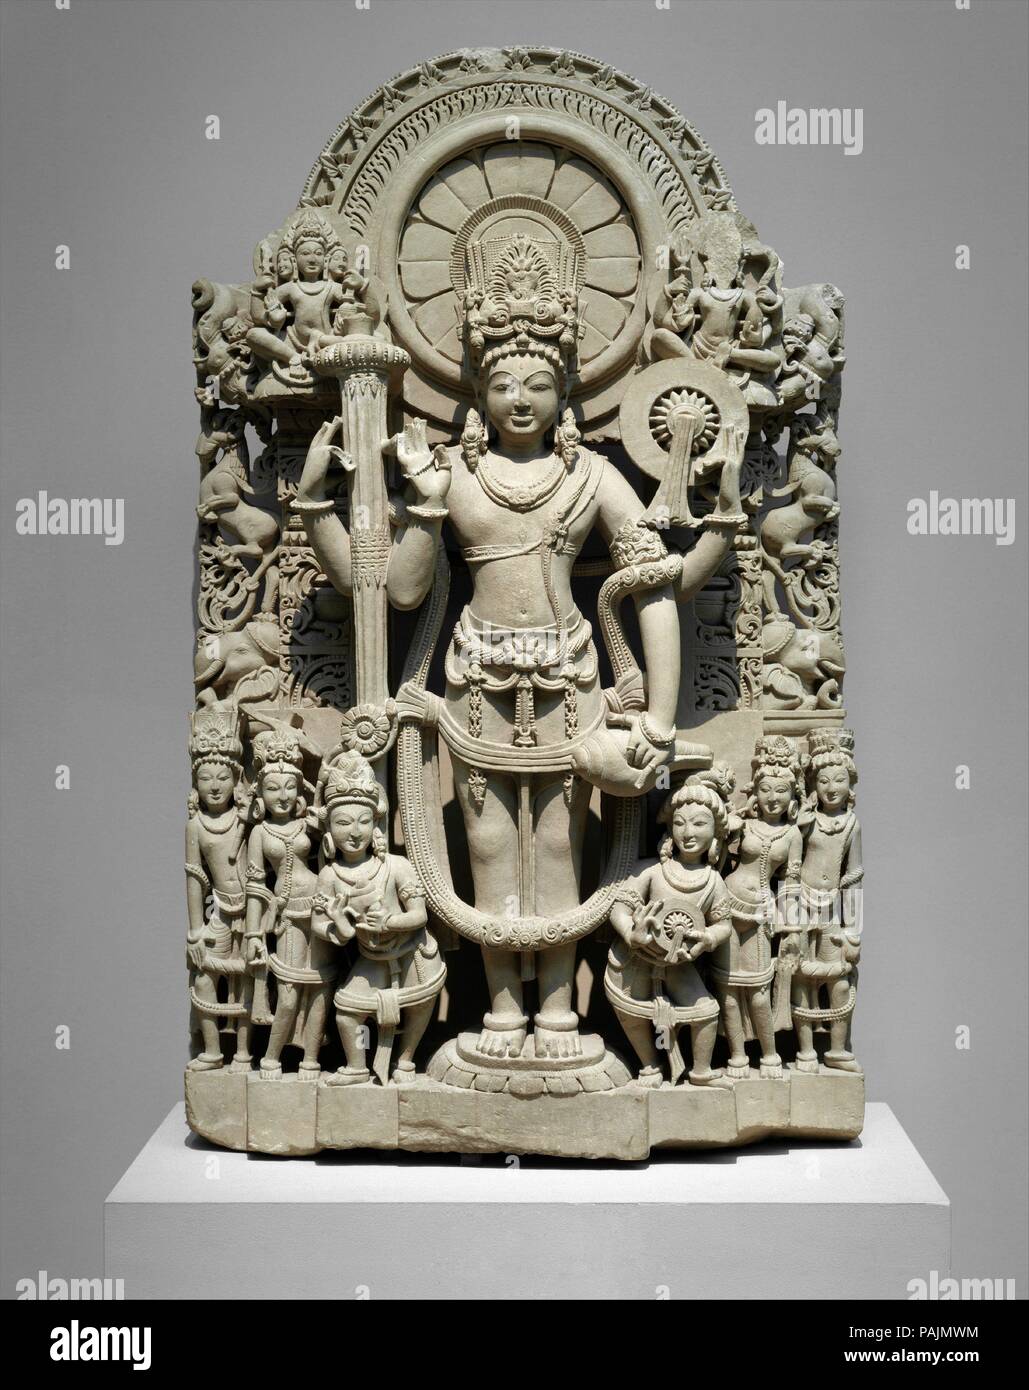 Vishnu. Culture: India (Punjab). Dimensions: H. 43 1/2 in. (110.5 cm); W. 25 5/8 in. (65.1 cm); D. 10 in. (25.4 cm). Date: 10th-11th century.  This elaborate stela of the god Vishnu shows him at the center holding his usual attributes (clockwise from upper right): a chakra (war discus), a conch-shell trumpet, and a gada (mace). His raised hand is held in abhayamudra, or the fear-allaying gesture. He wears a tall miter and a long garland of flowers. His head is surrounded by an ornate nimbus with bands of lotus petals, flames, and abstracted triangular floral motifs. Flanking his legs are six f Stock Photo